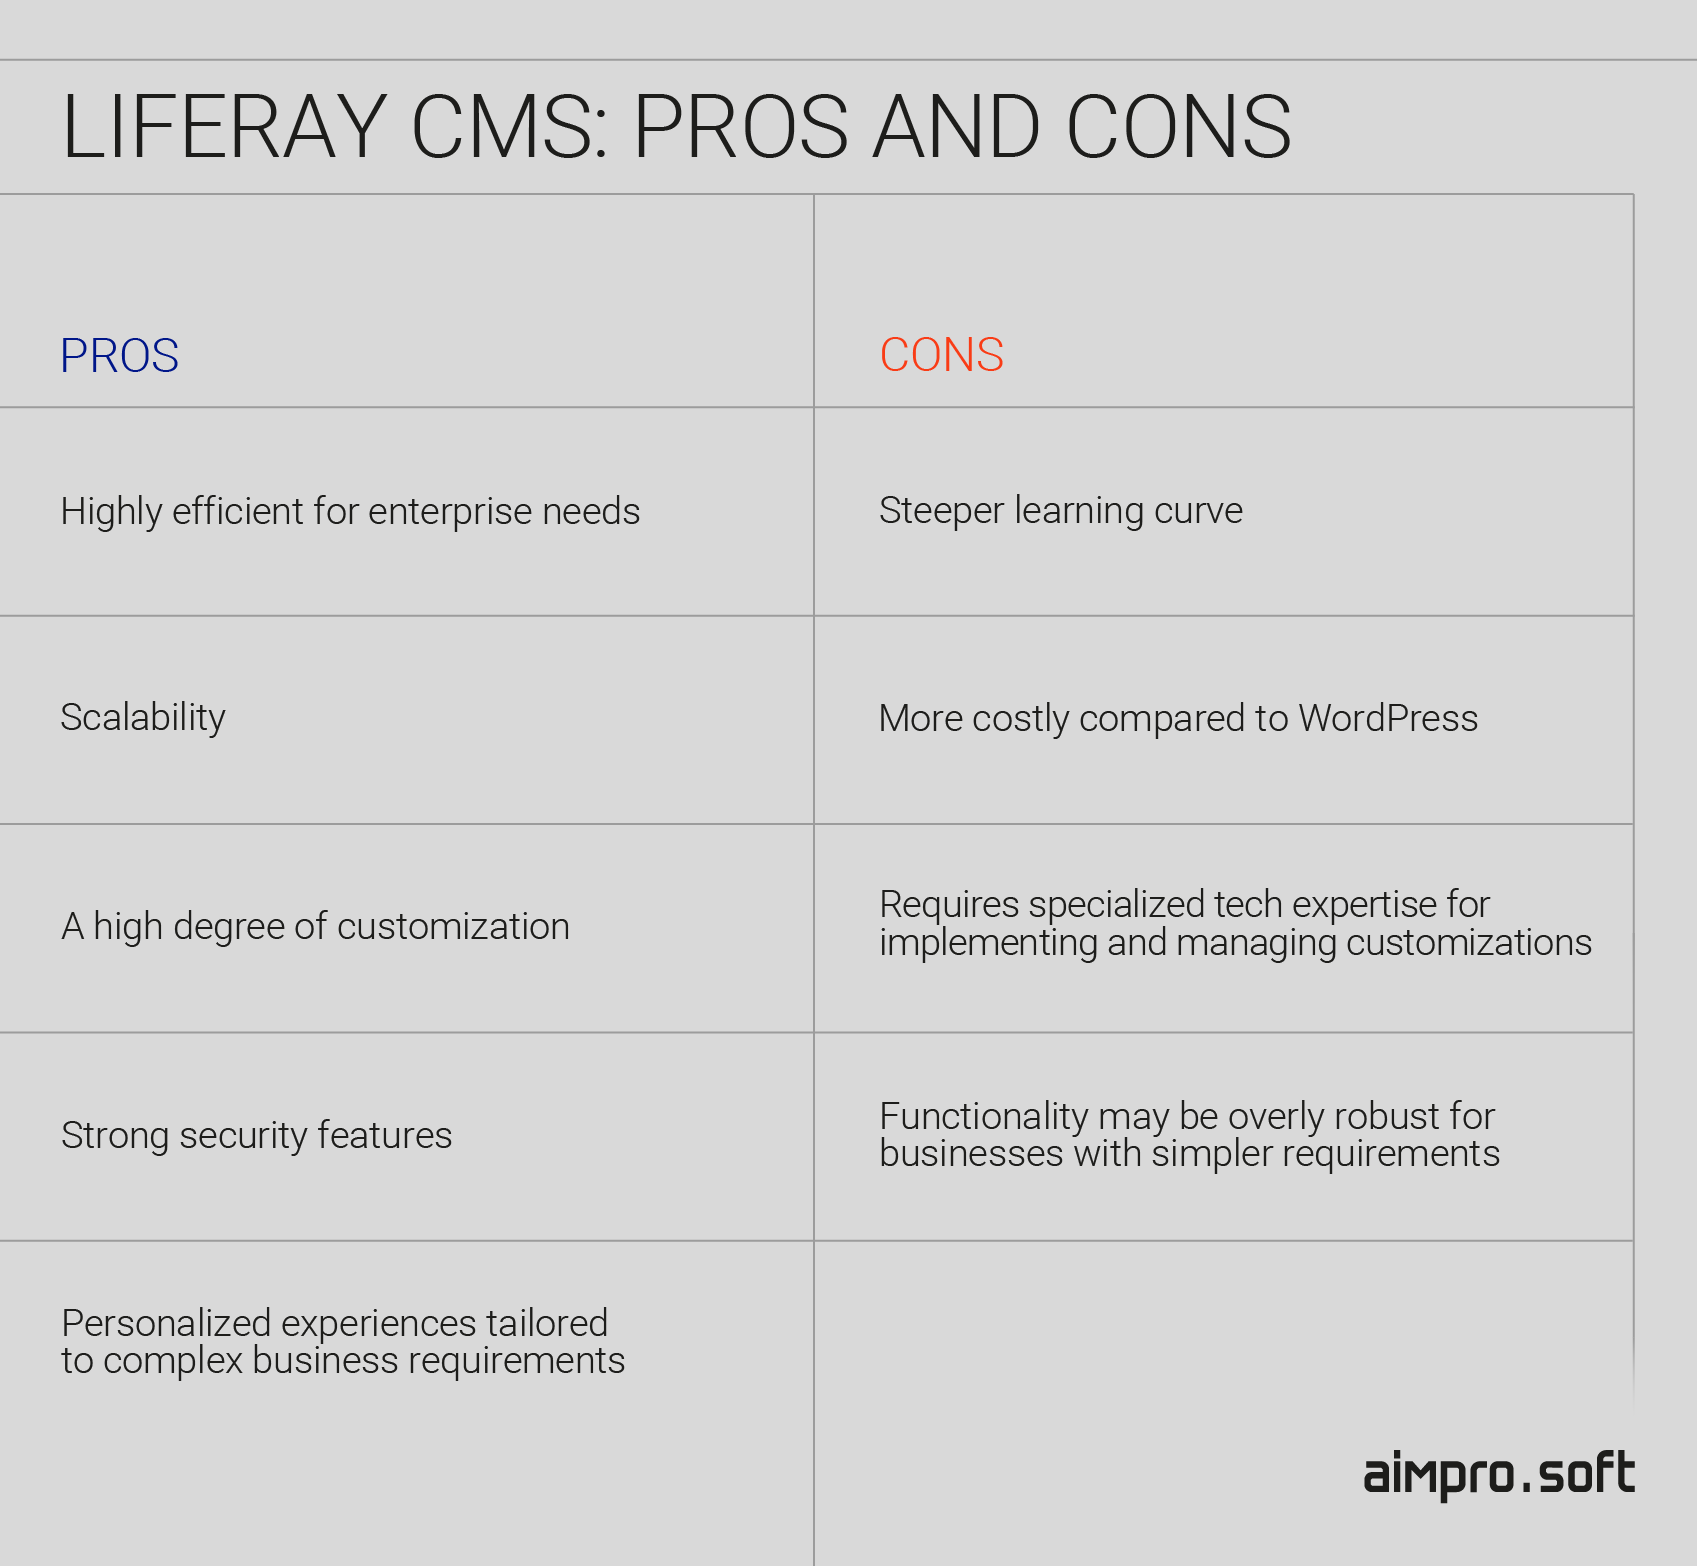 Liferay CMS pros and cons